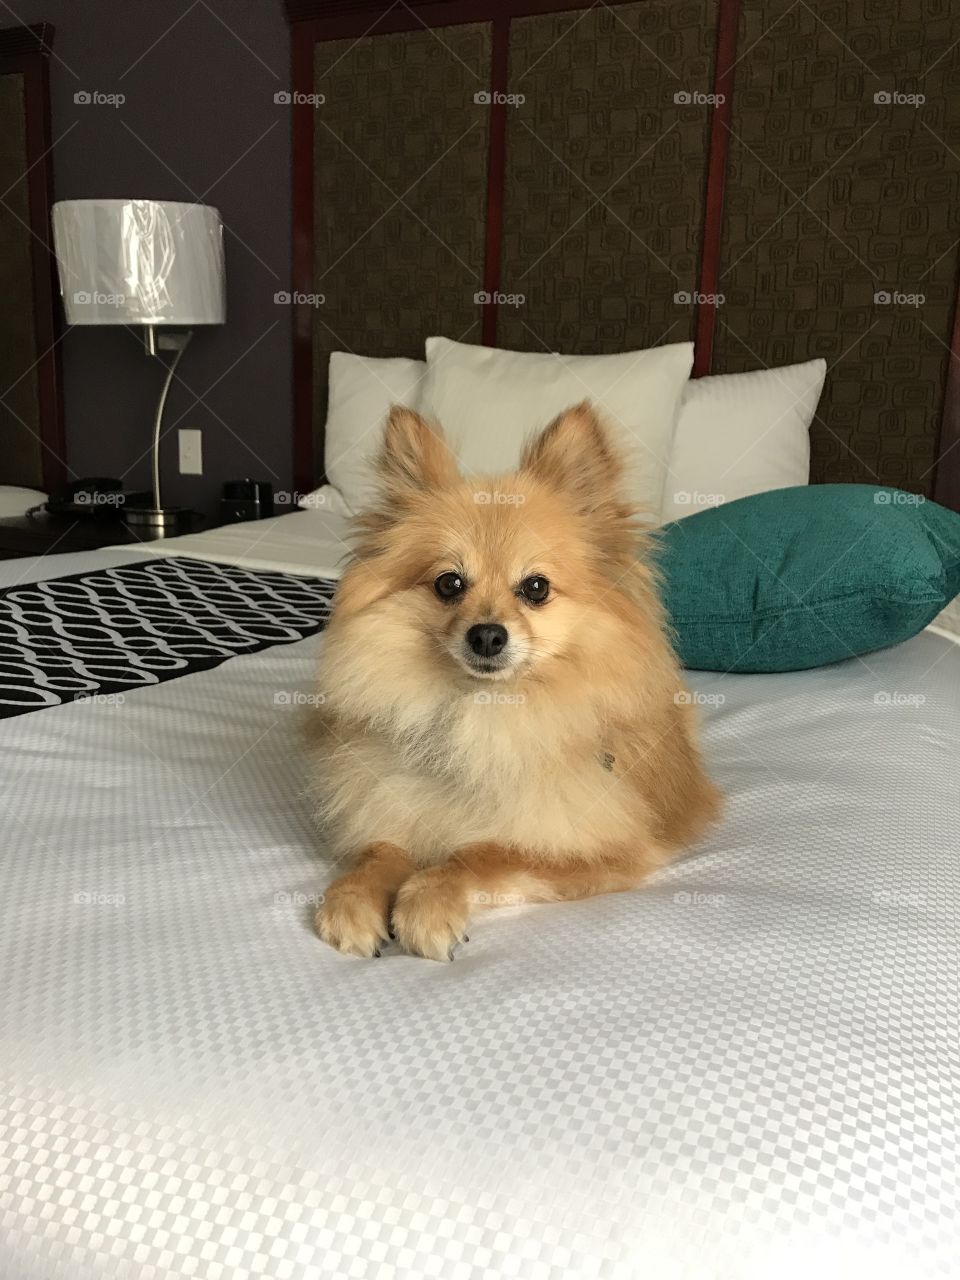 Red Pomeranian dog lying on white bedspread on bed relaxing